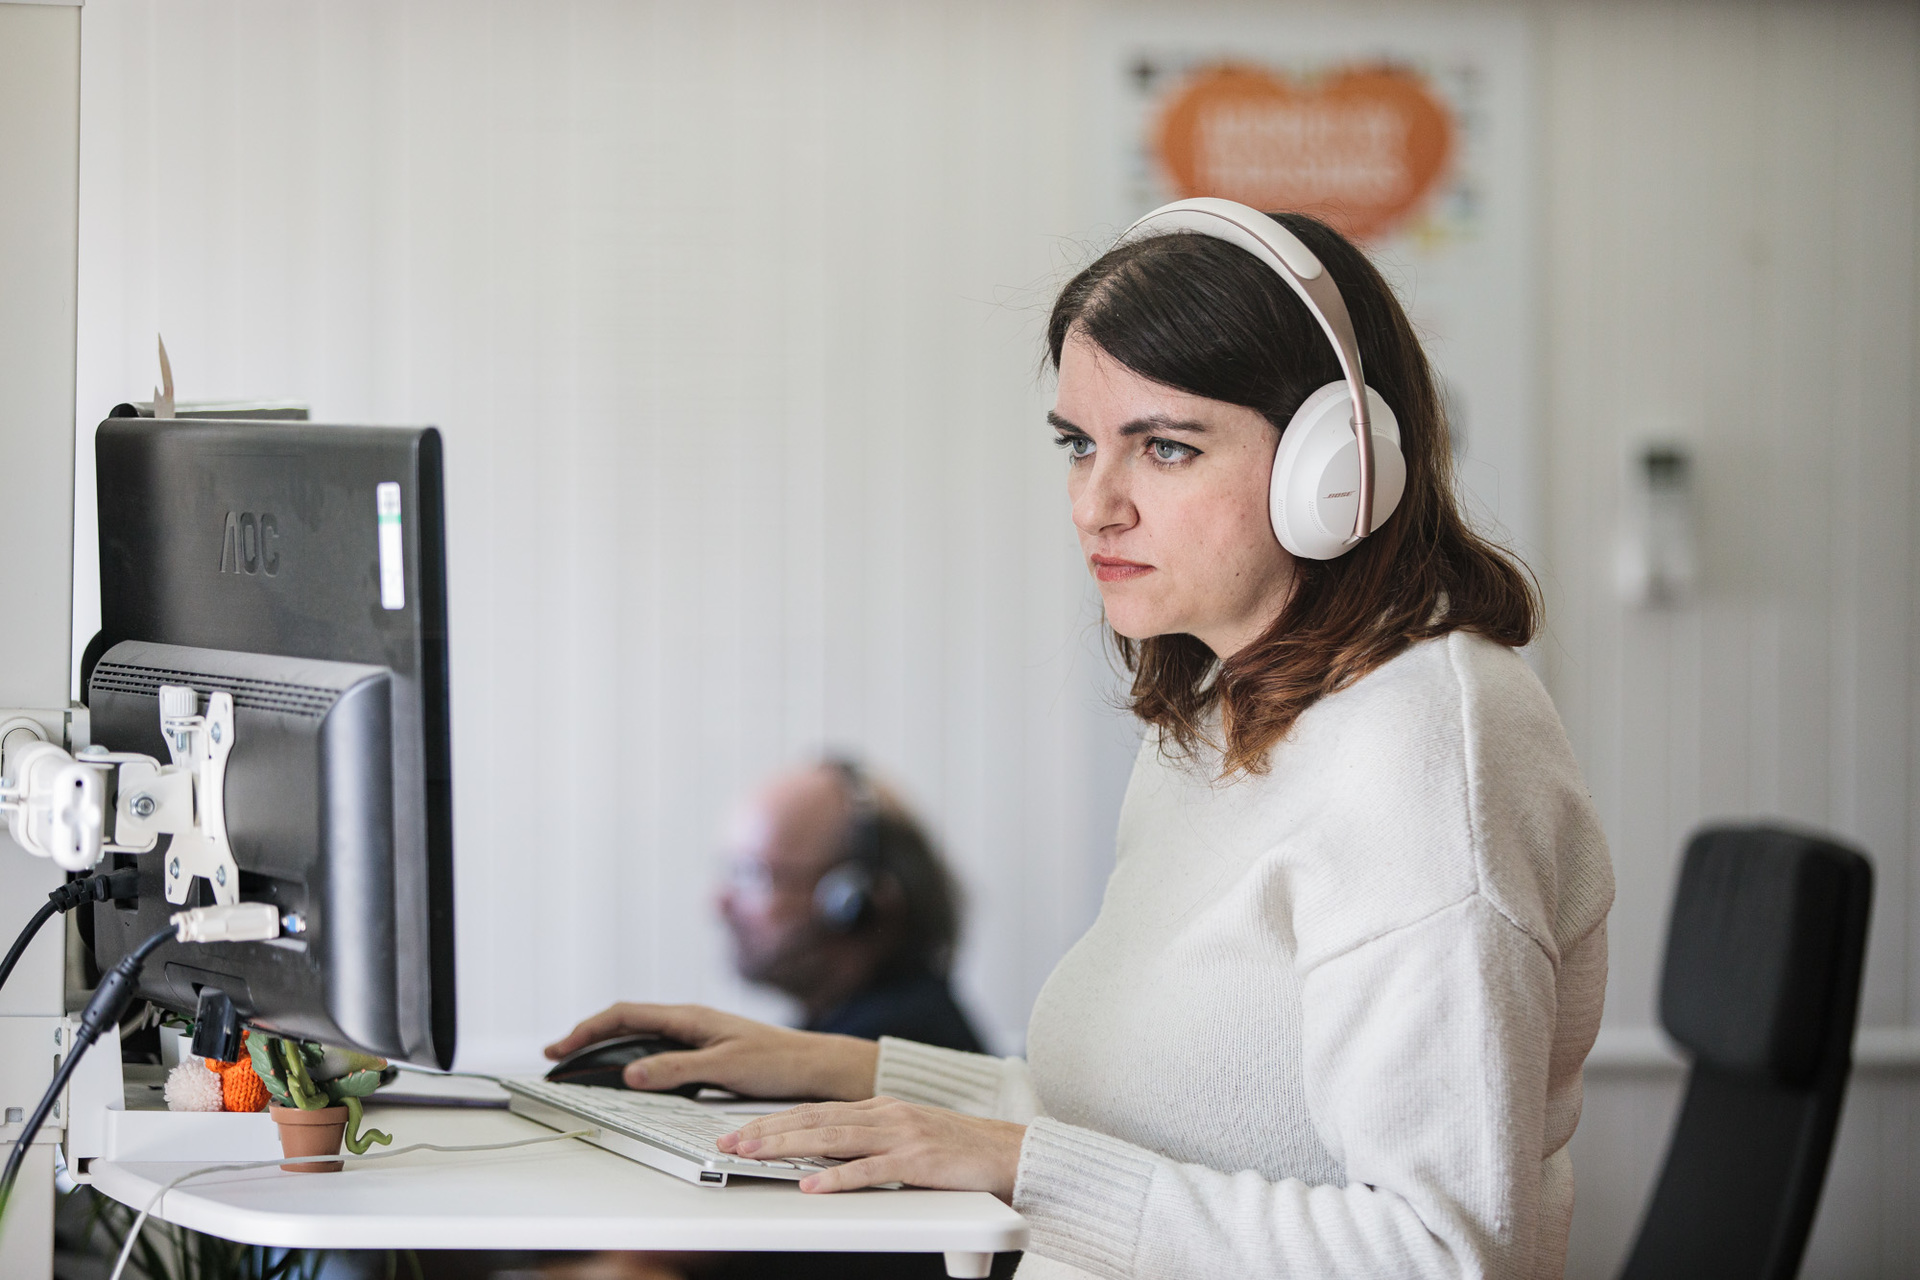 A woman stood up at her desk, with headphones on